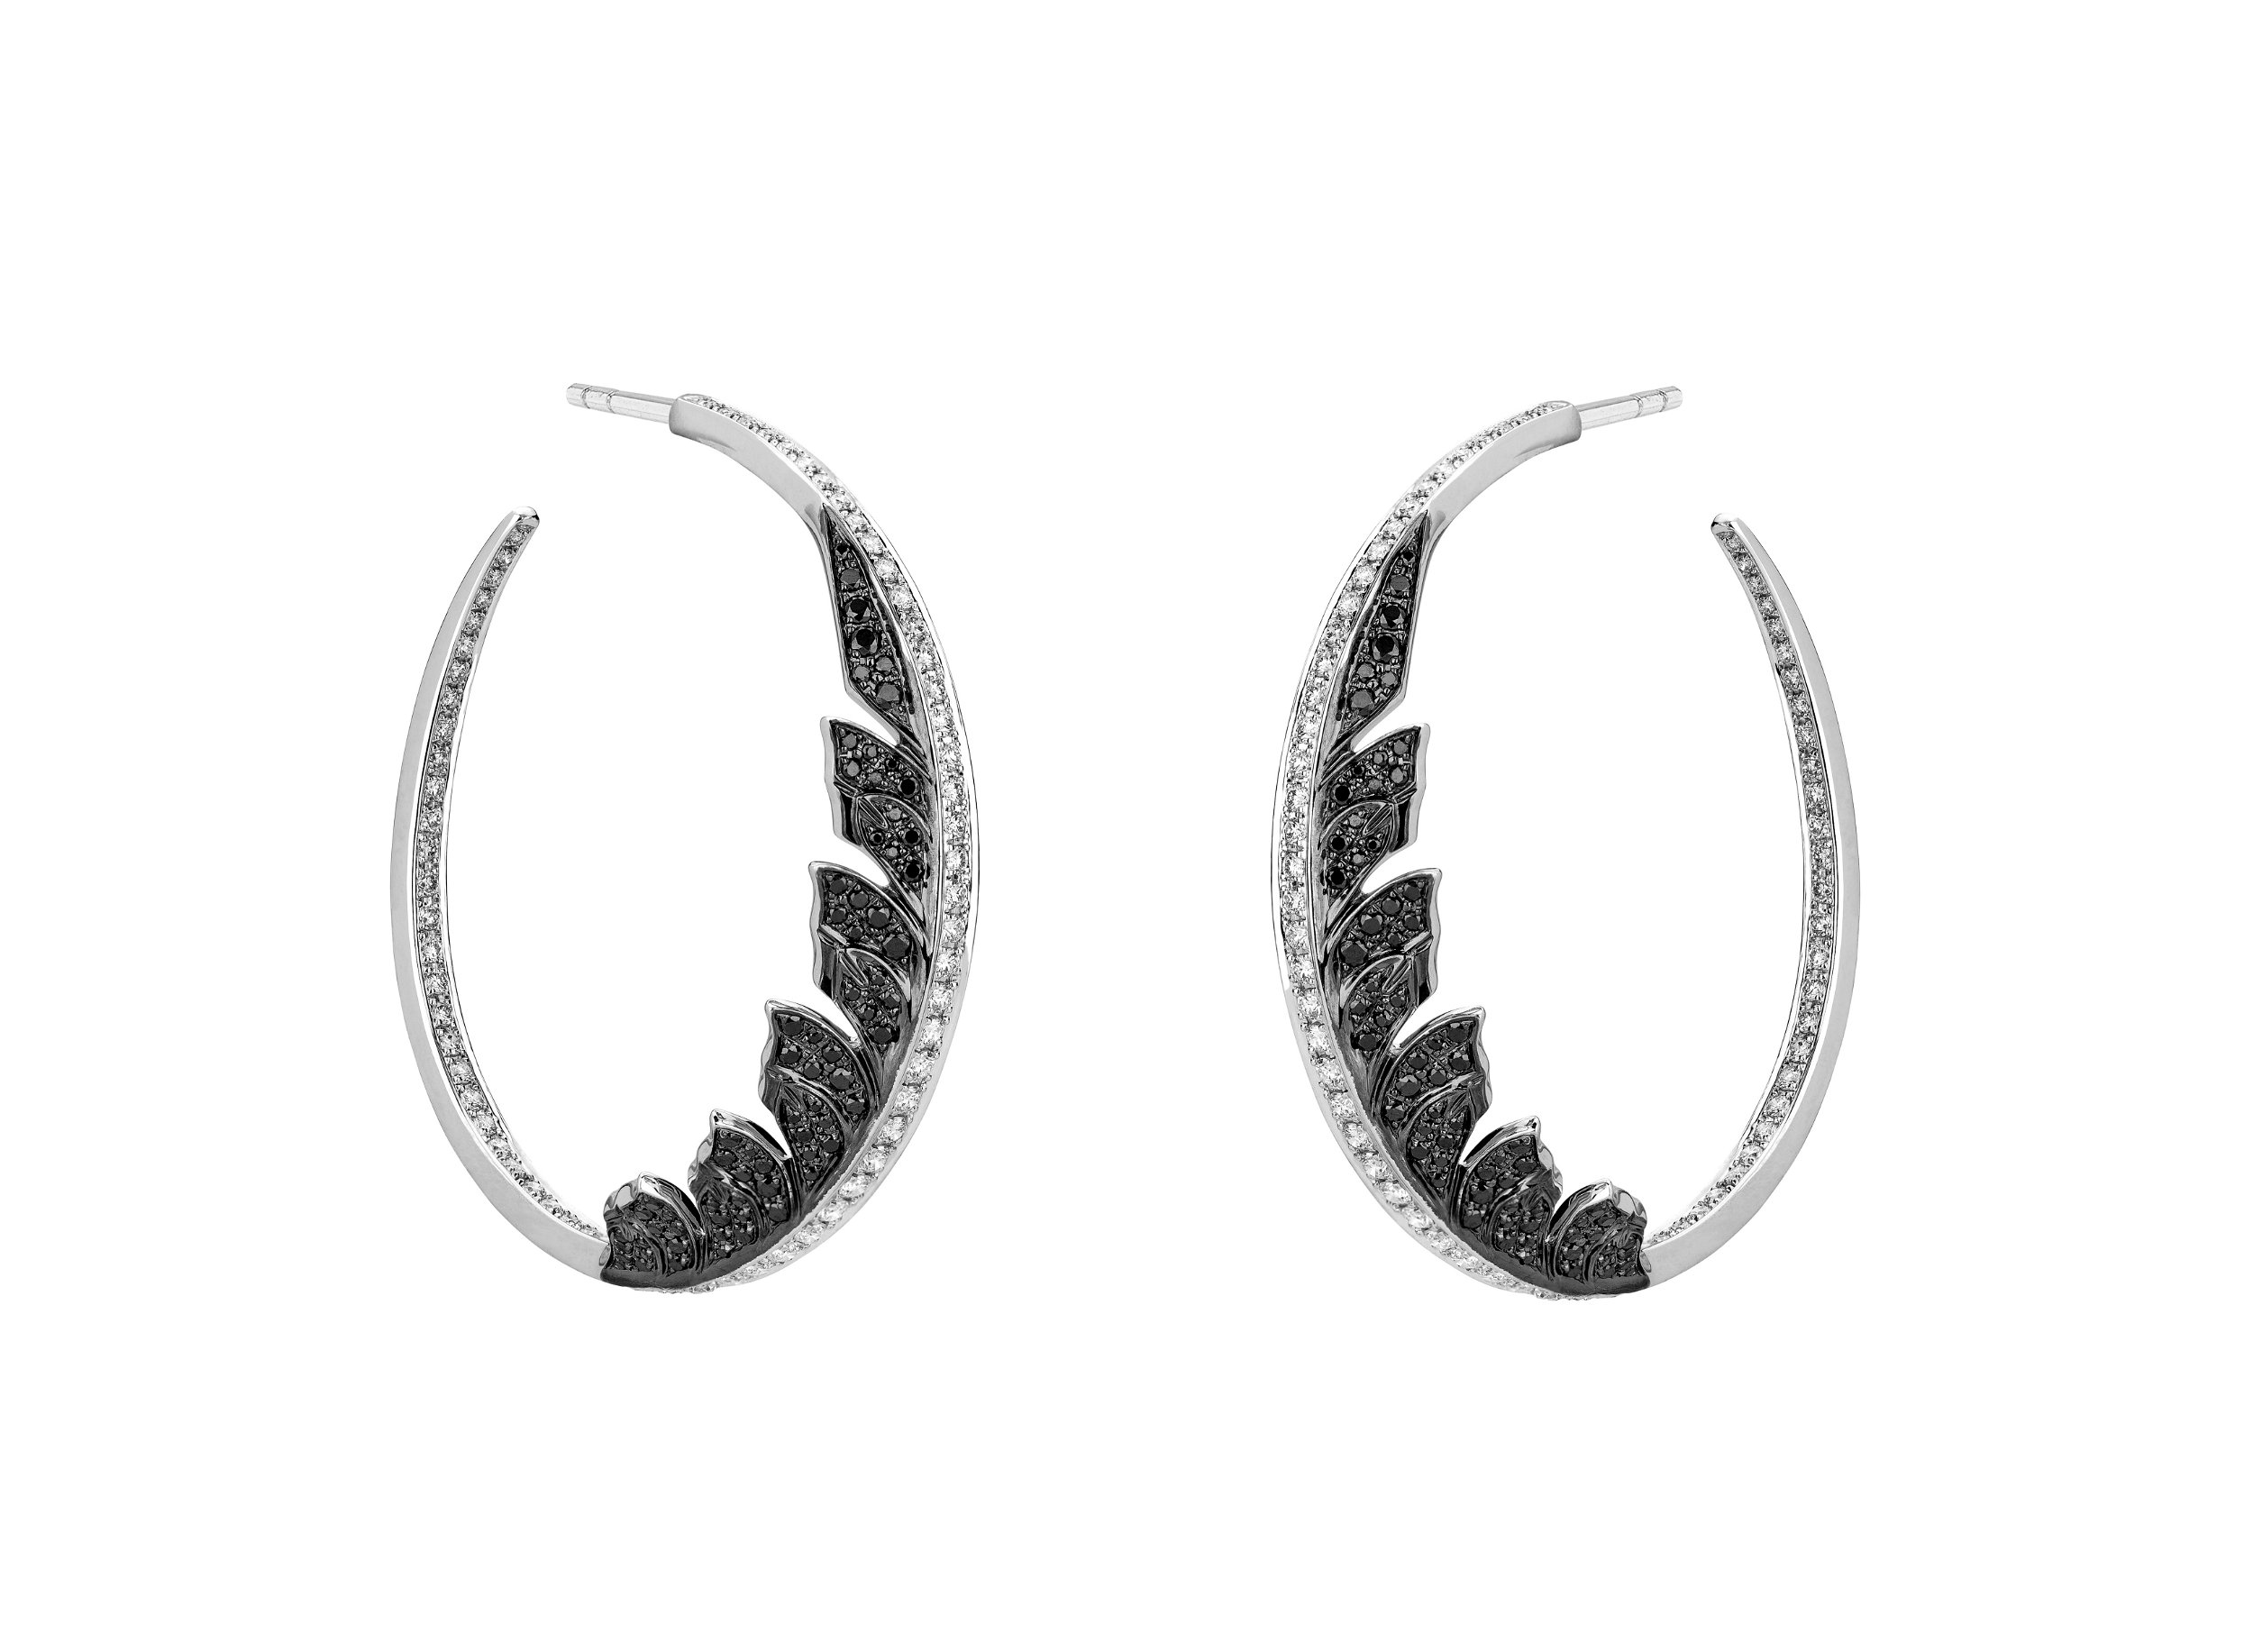 Magnipheasant Plume Hoop Earrings with Black Diamonds in 18kt White Gold